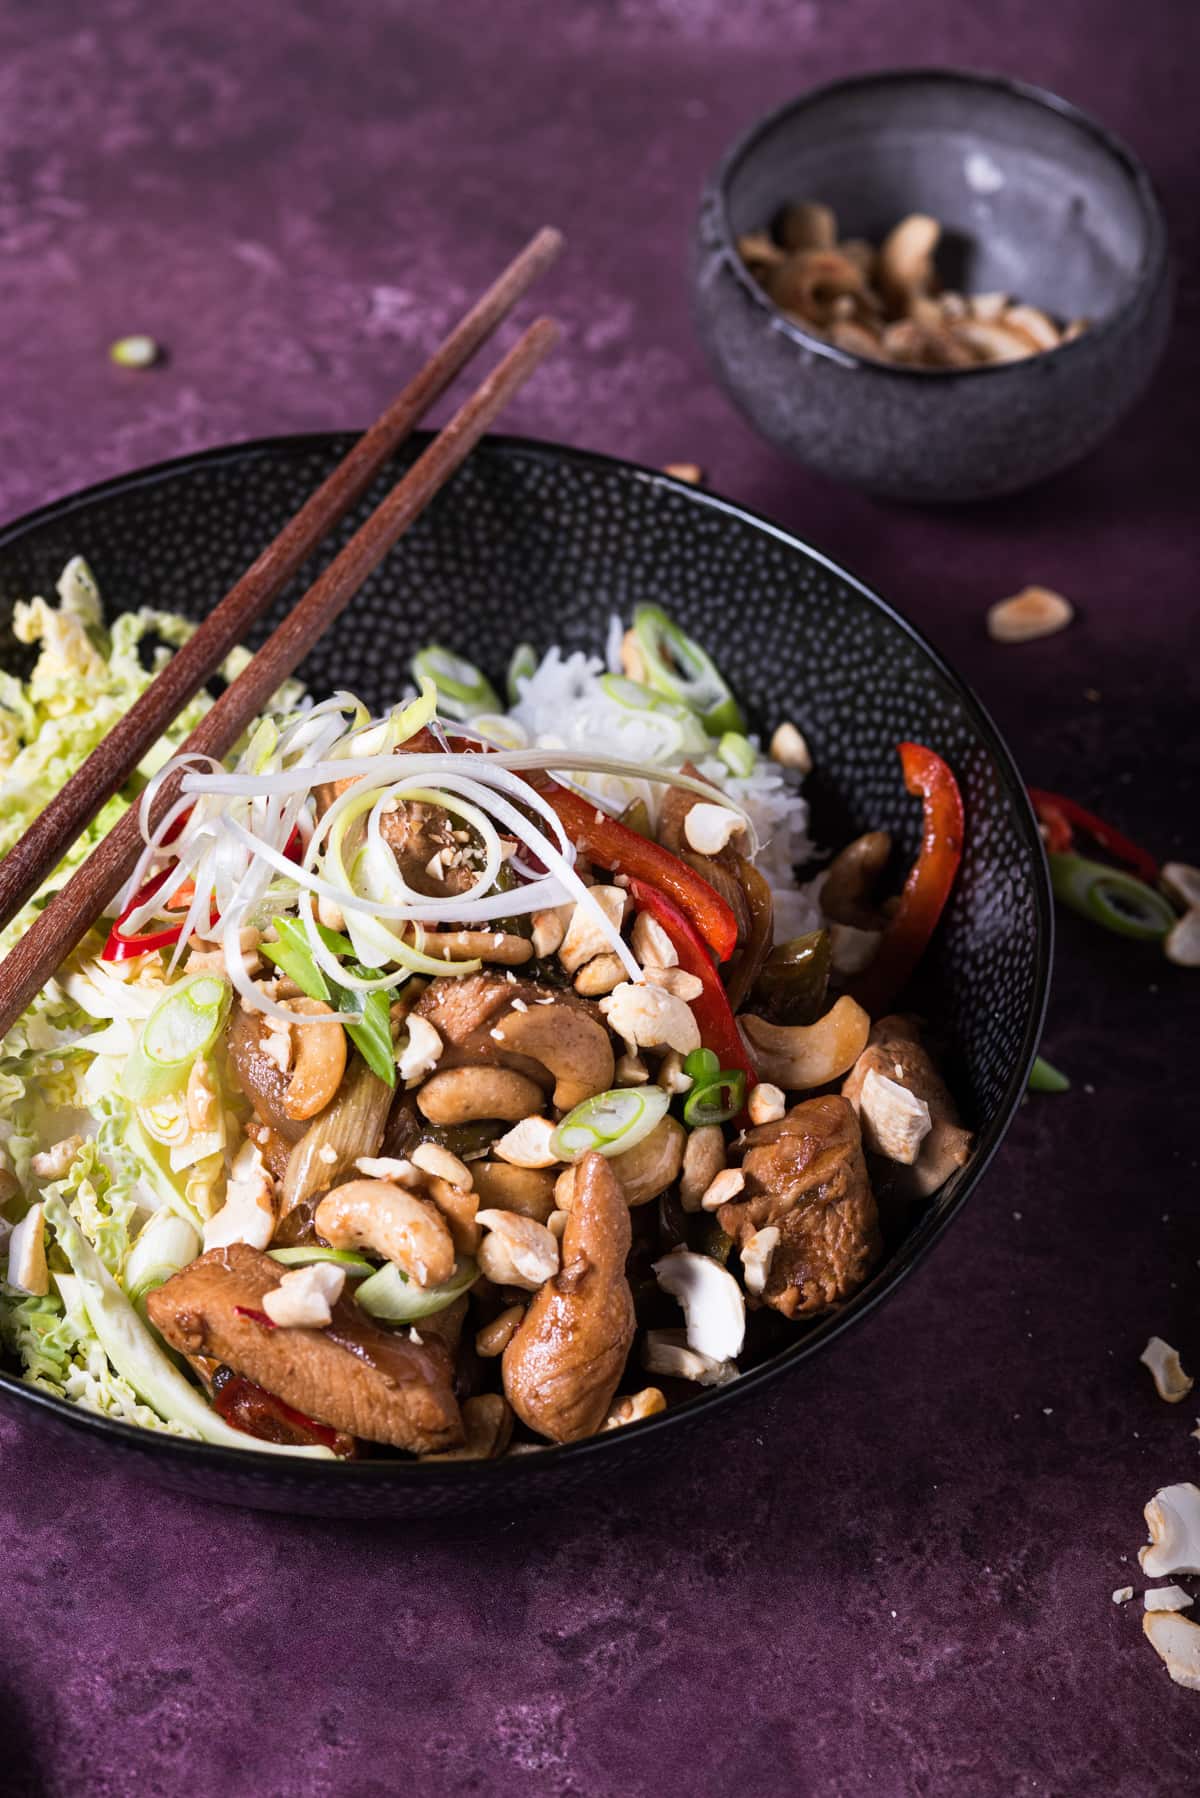 A delicious and tempting bowl of chicken and cashew nut stirfry served with sliced chillies and chopsticks.